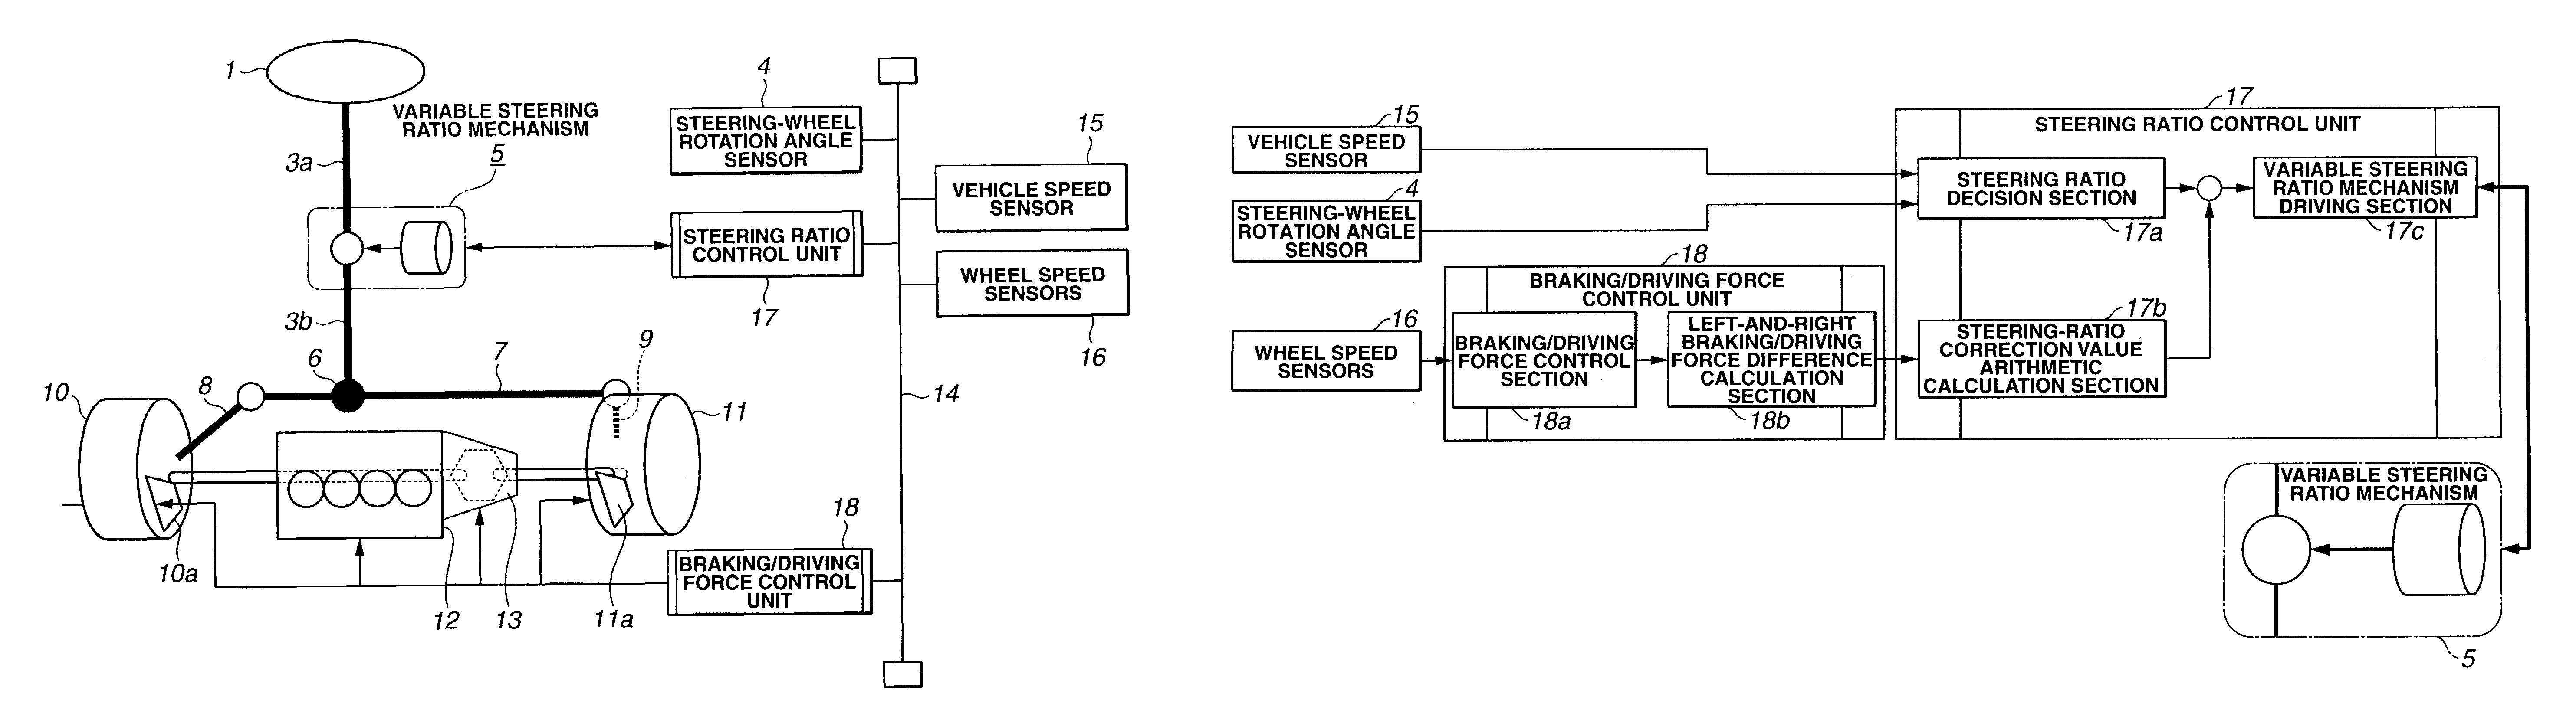 Steering ratio control system of vehicle